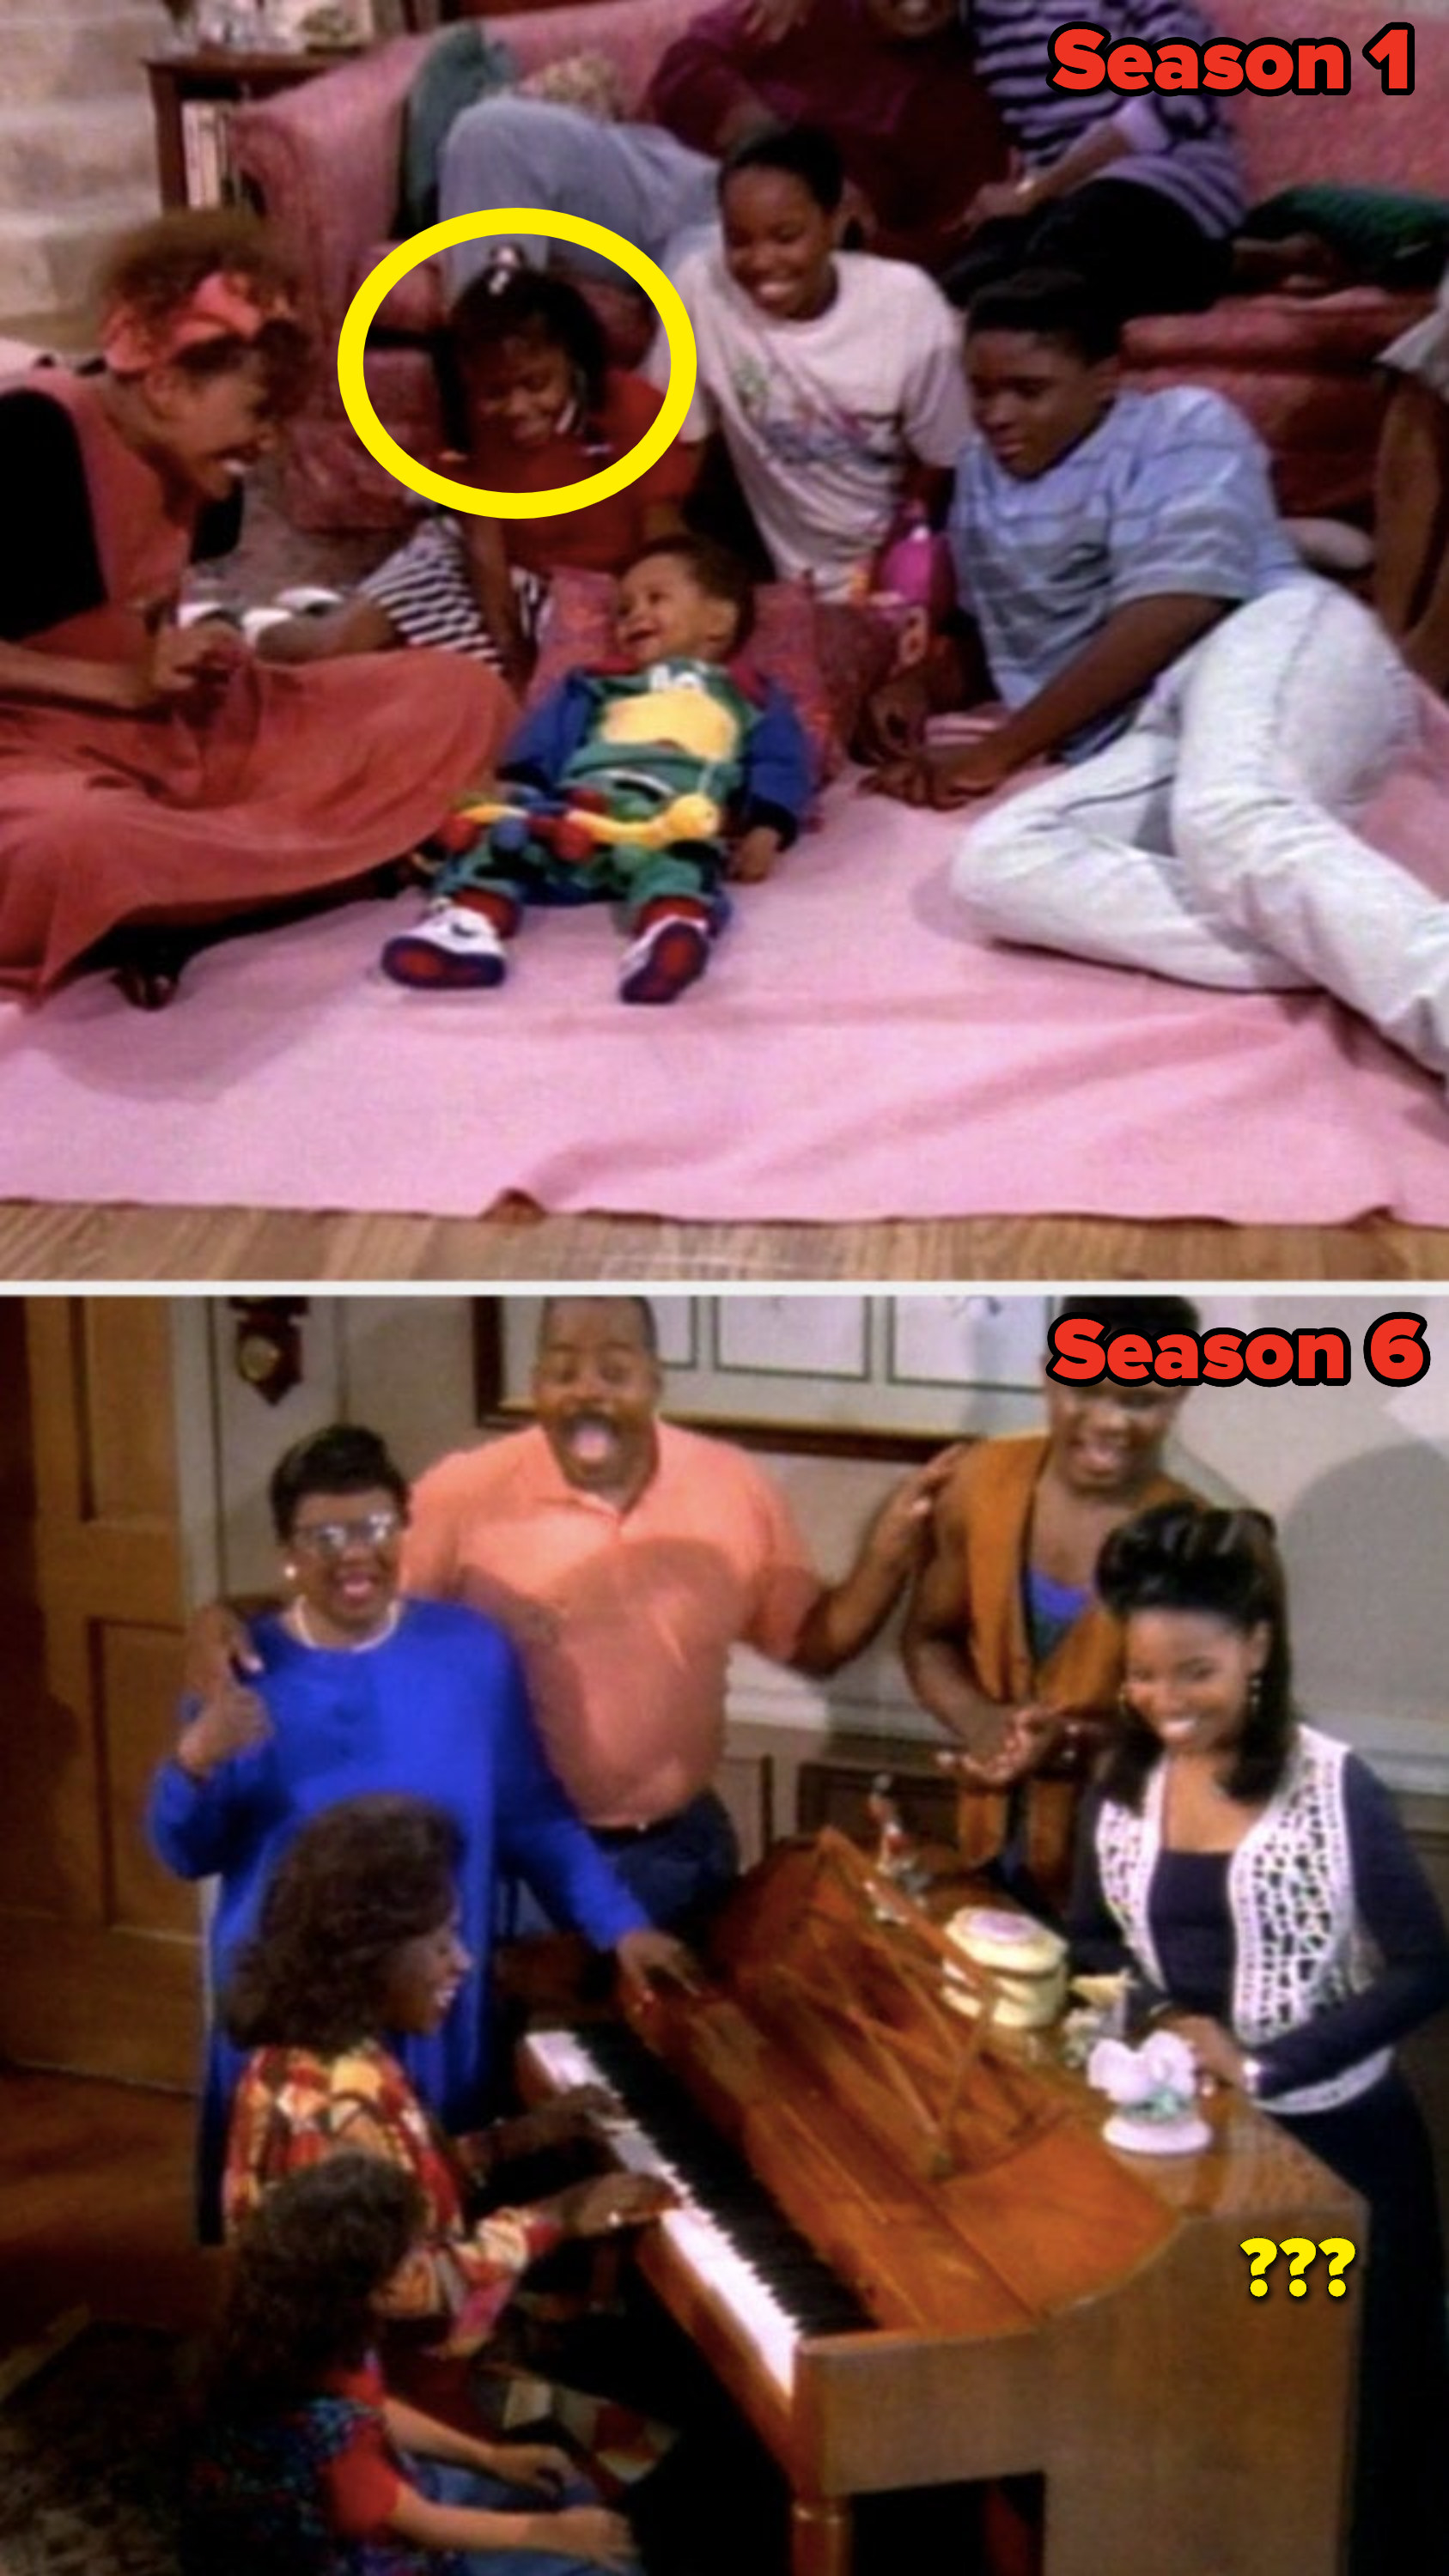 In the Season 1 &quot;Family Matters&quot; theme song, Judy Winslow is present, but she&#x27;s not in the Season 6 theme song